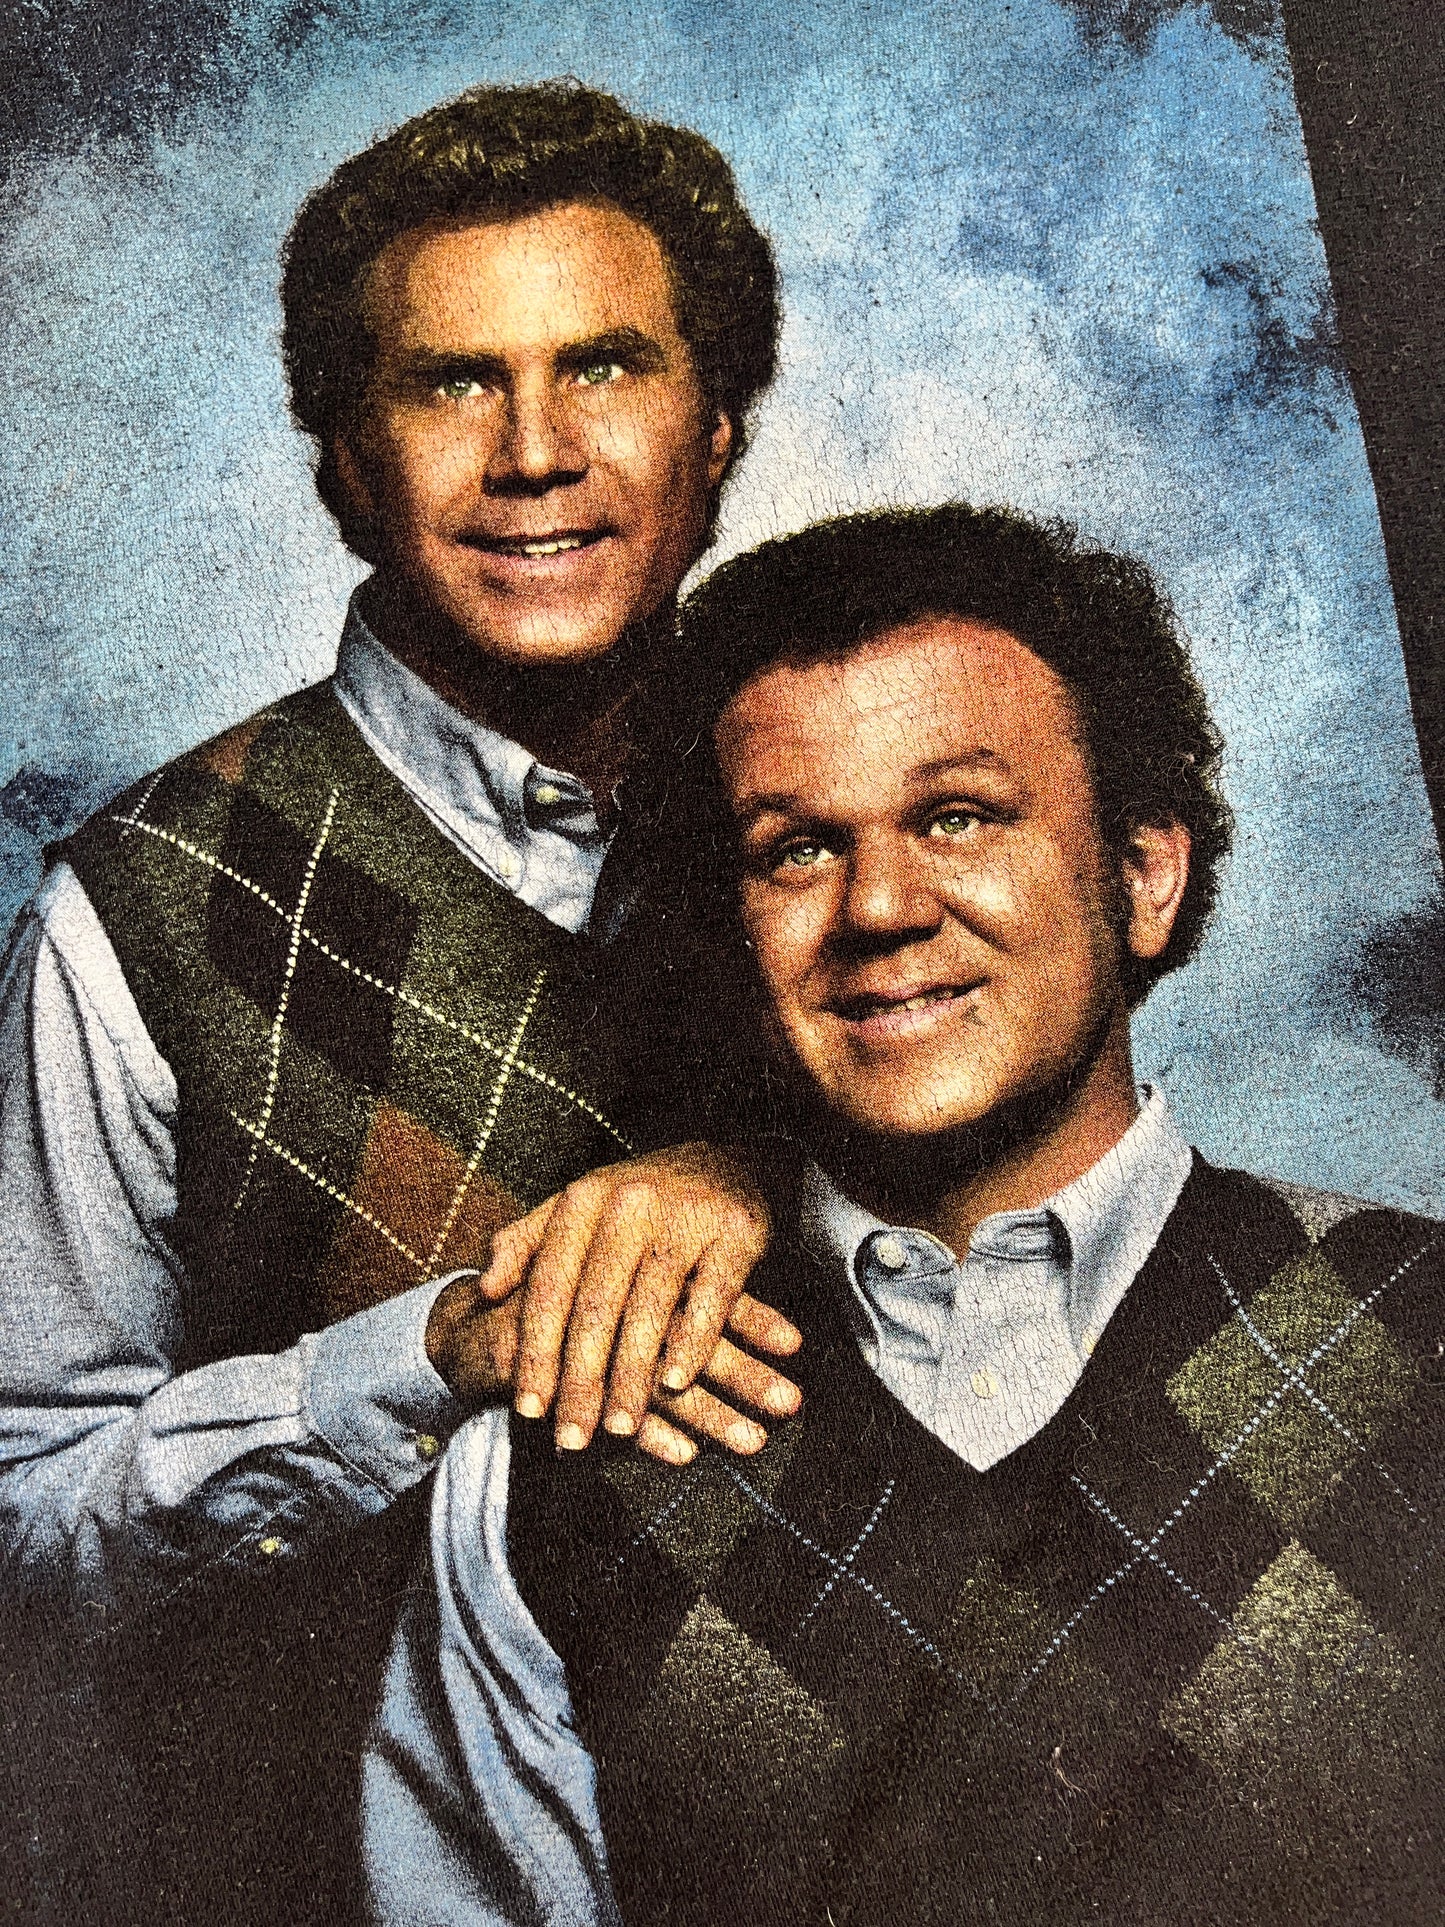 Vintage Step Brothers T-Shirt Movie Will Ferrel